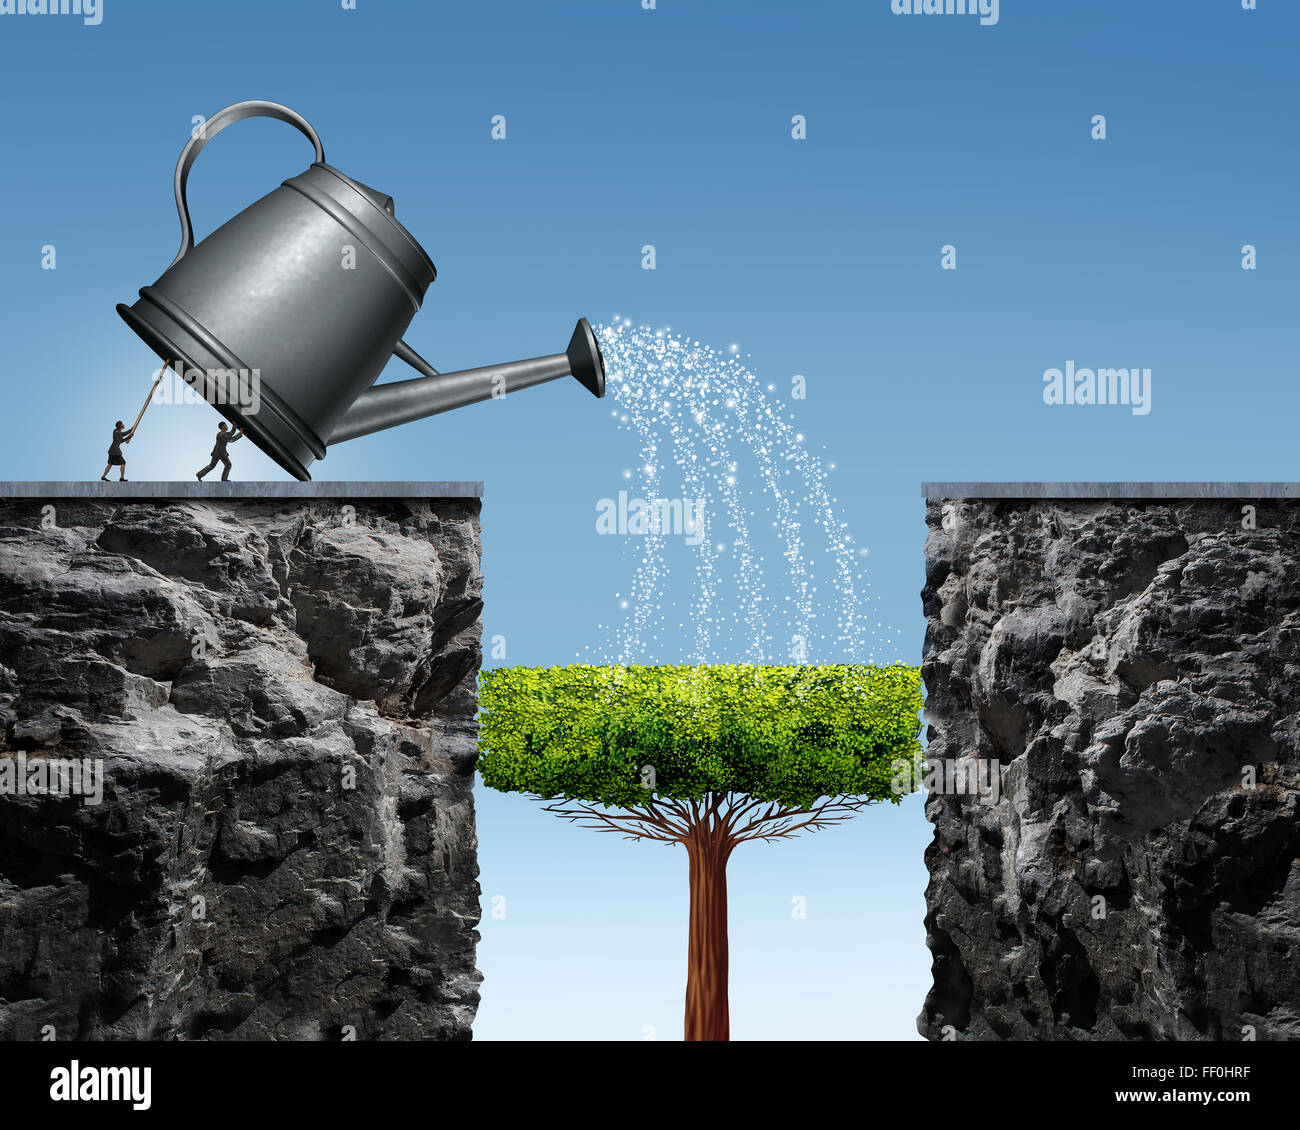 Planning for future success business concept with a businessman and businesswoman lifting a watering can to help a tree grow into a future bridge to achieve the long term goal of crossing to the other side. Stock Photo